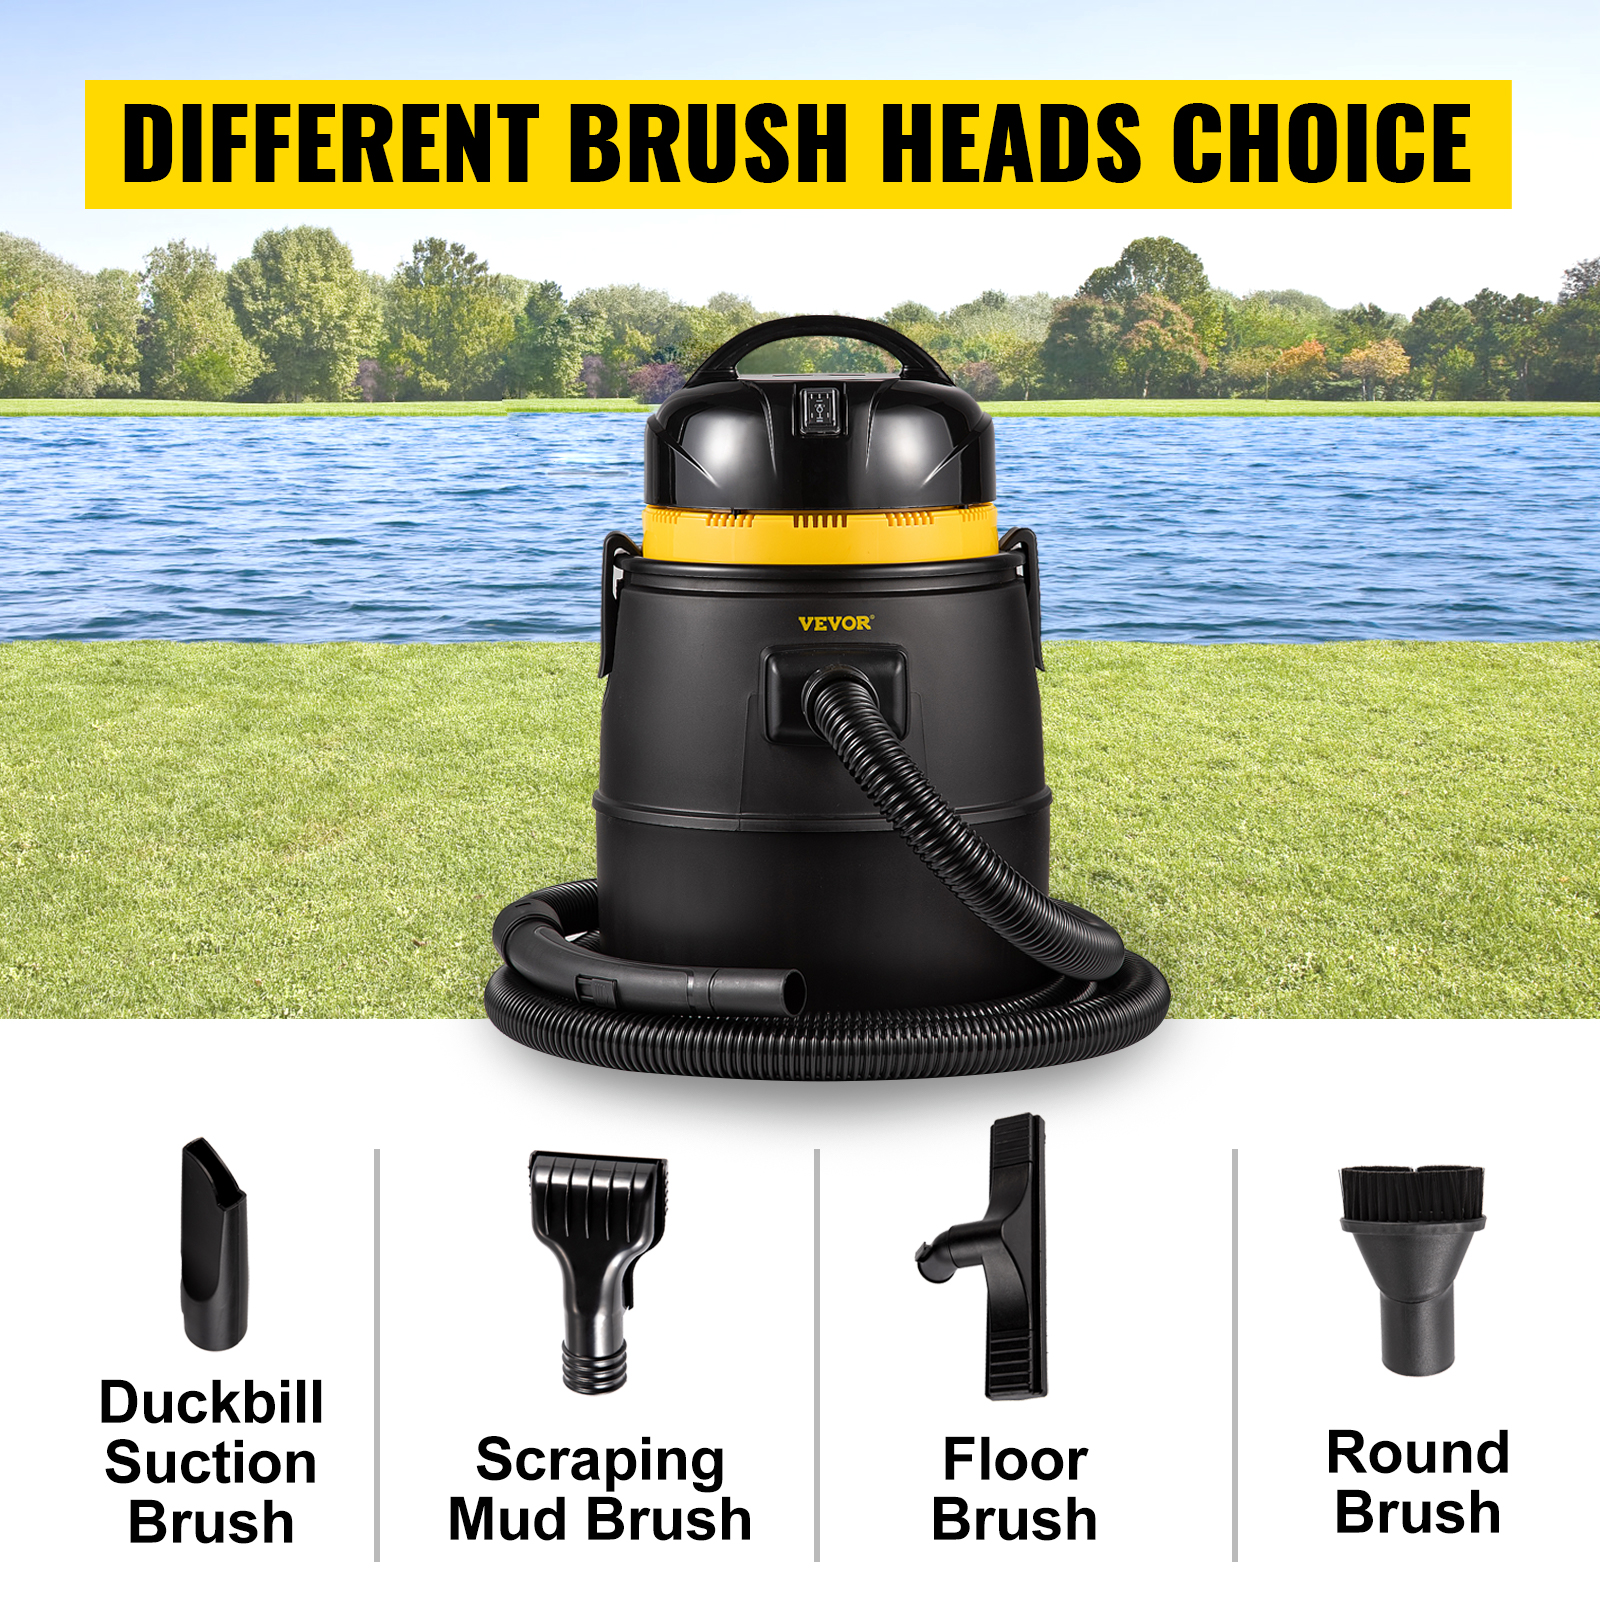 4 Brush Heads 4 Extended Tubes 1 Filter Bag for Multi-use Cleaning Above Ground 1400W Motor in Single Chamber Suction System VEVOR Pond Vacuum Cleaner 120V Motor w/15 ft Electric Wire 